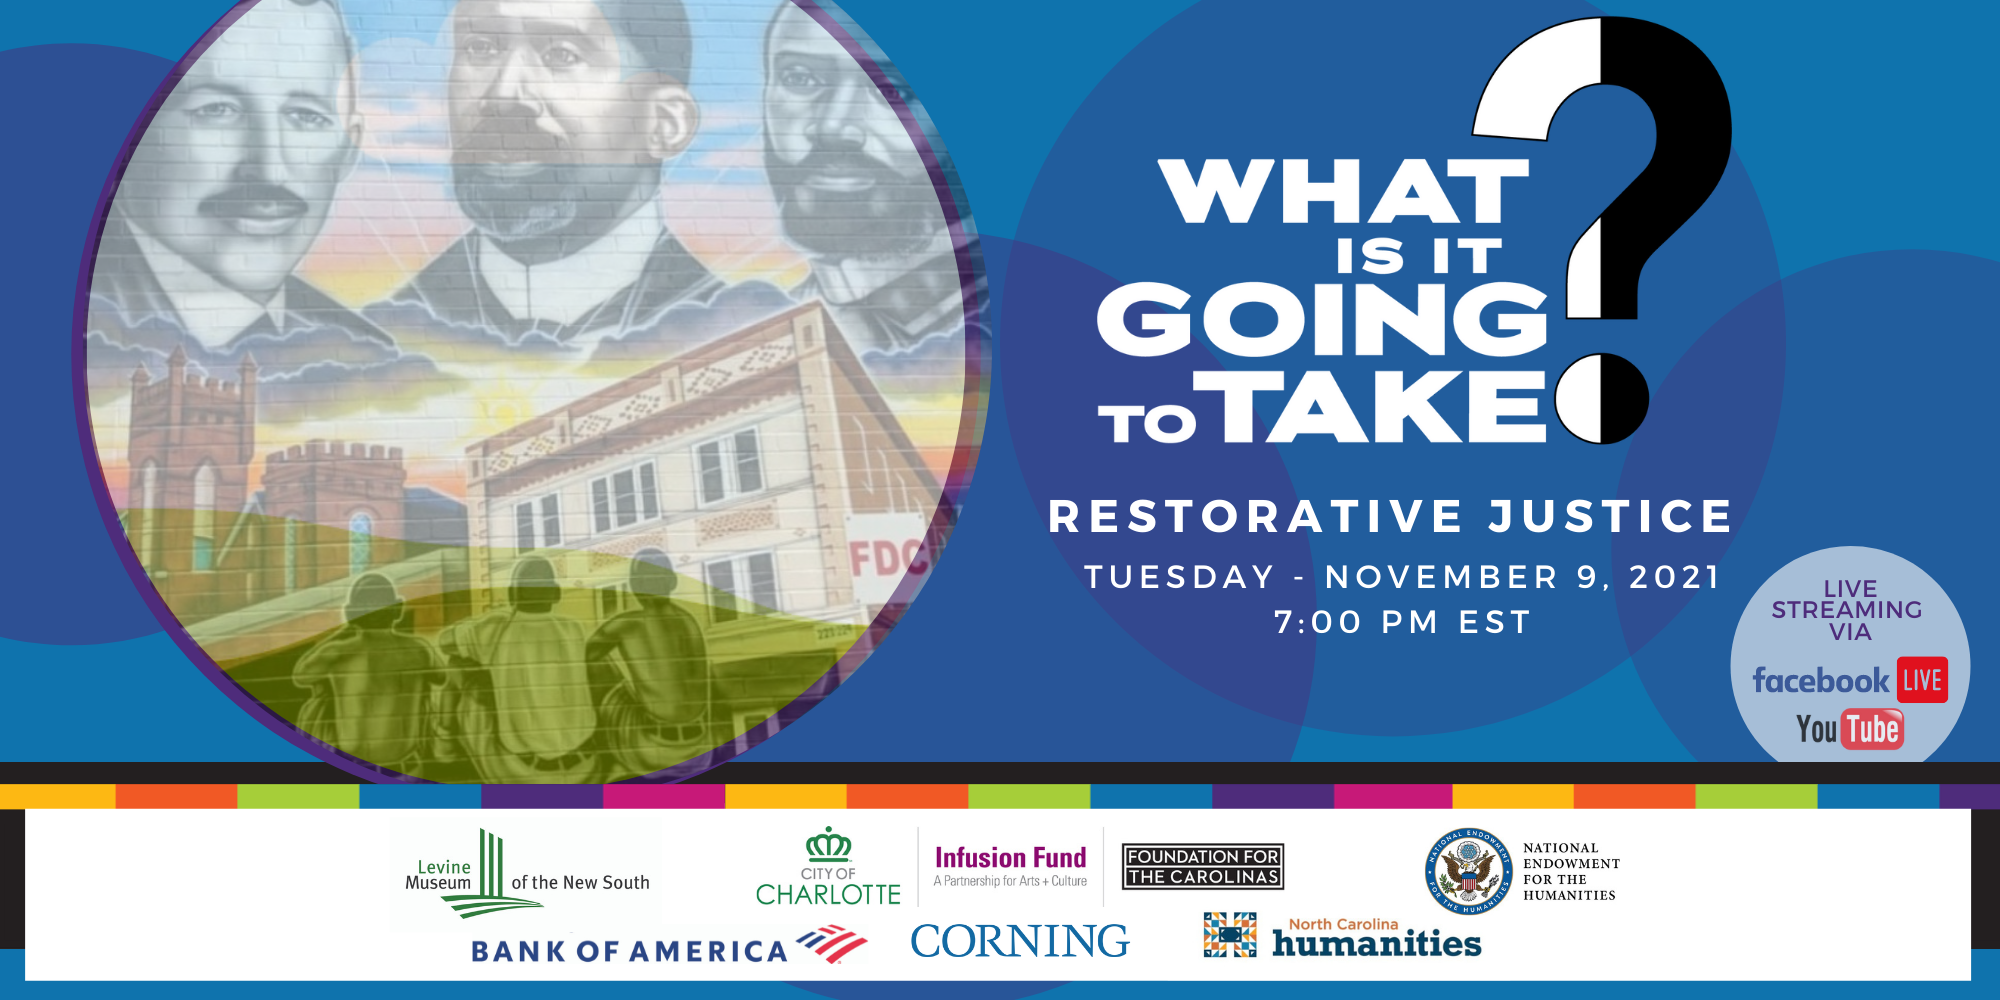 Levine Museum of the New South What Is It Going To Take? Restorative Justice Event Image